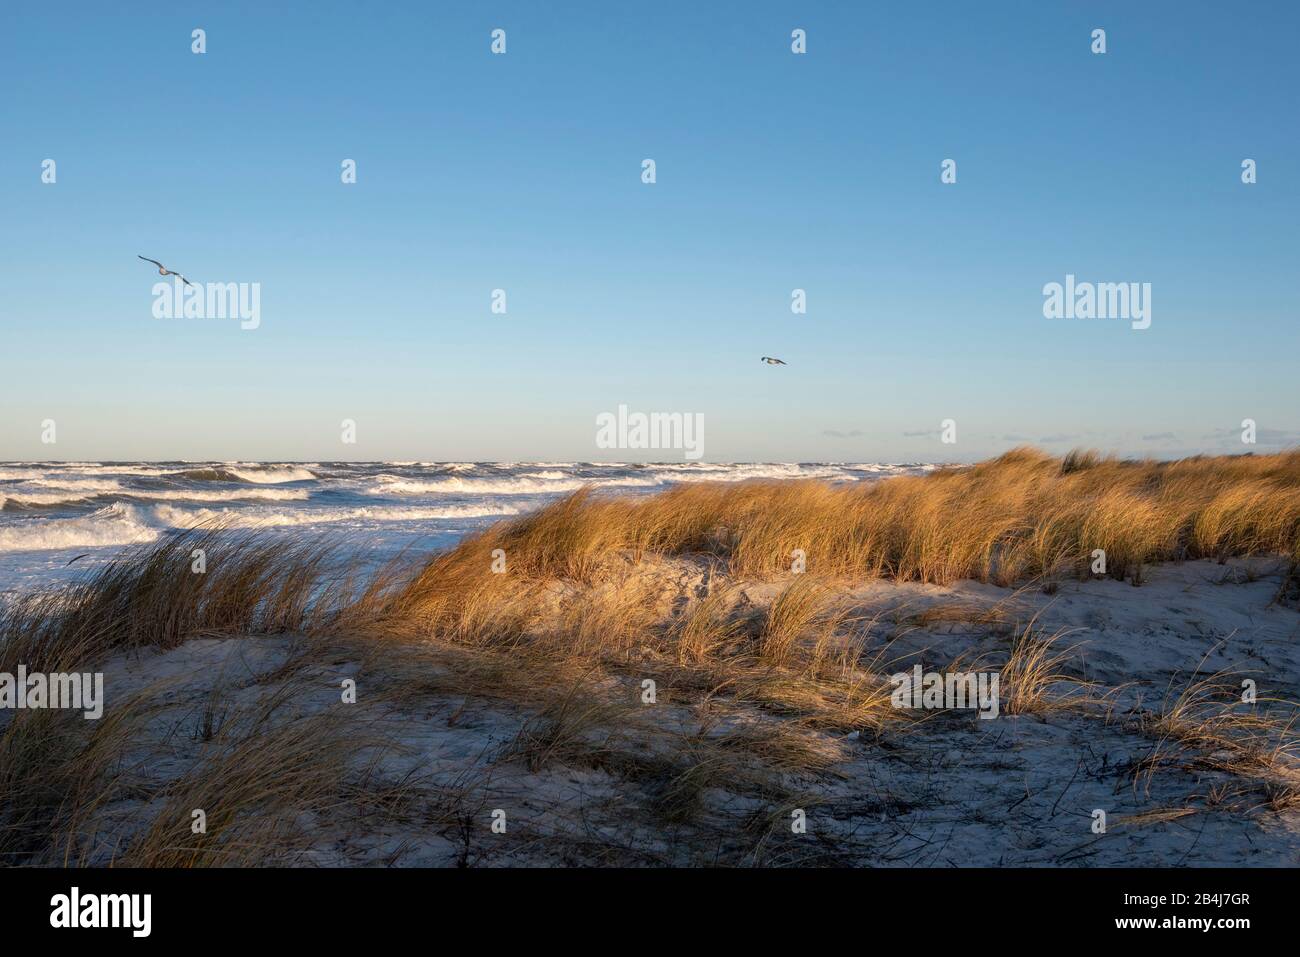 Germany, Mecklenburg-Vorpommern, Prerow, the first storm of the year, waves, beach Prerow, Baltic Sea. Stock Photo